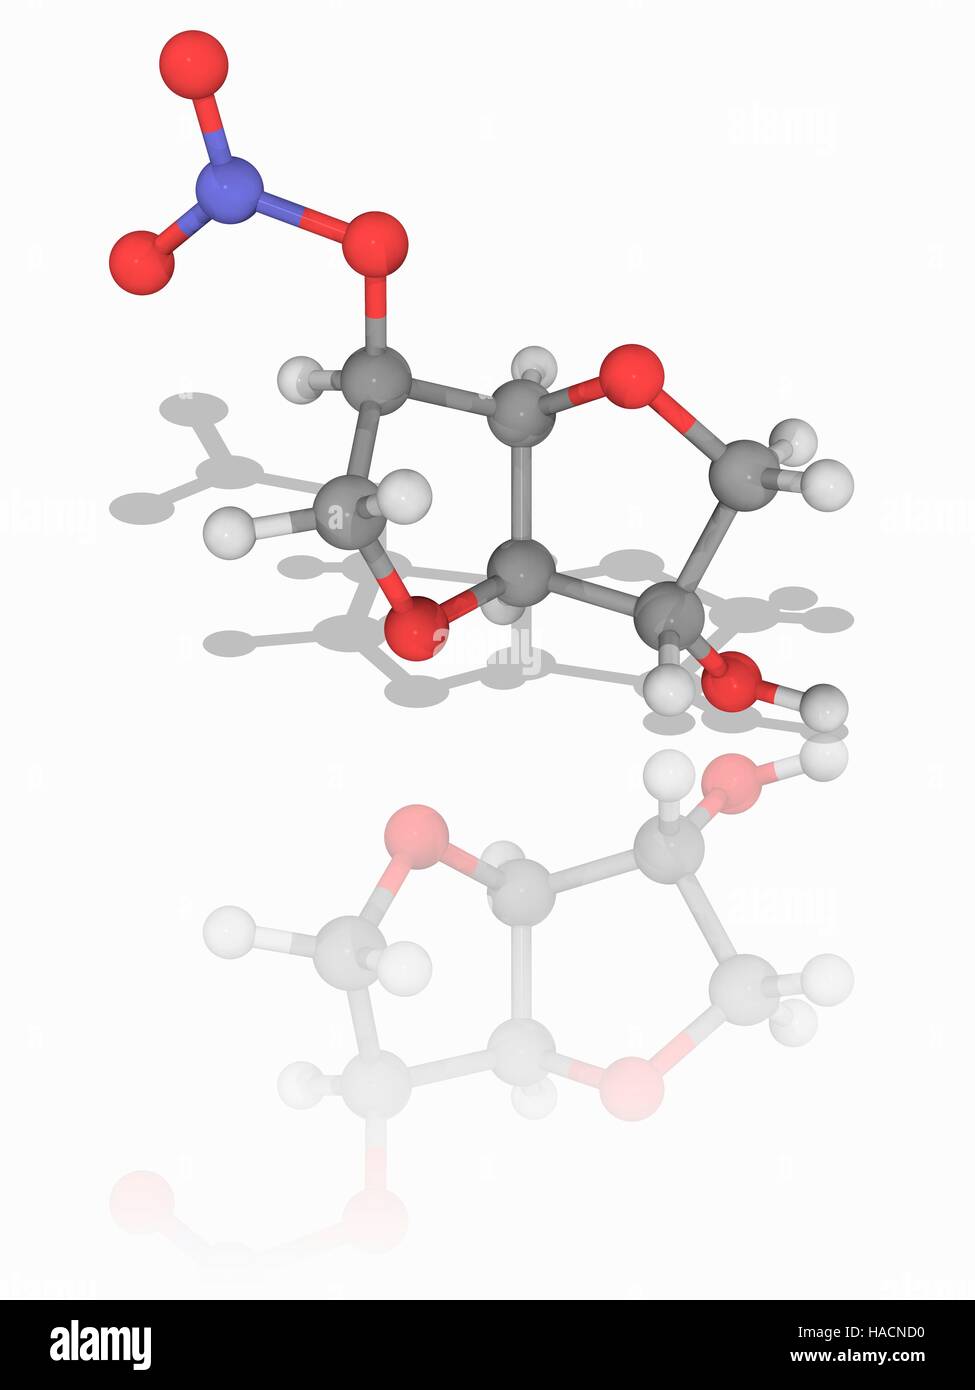 Isosorbide mononitrate. Molecular model of the nitrate-class drug isosorbide mononitrate (C6.H9.N.O6), used to treat angina pectoris. It dilates blood vessels to reduce blood pressure. Atoms are represented as spheres and are colour-coded: carbon (grey), hydrogen (white), nitrogen (blue) and oxygen (red). Illustration. Stock Photo